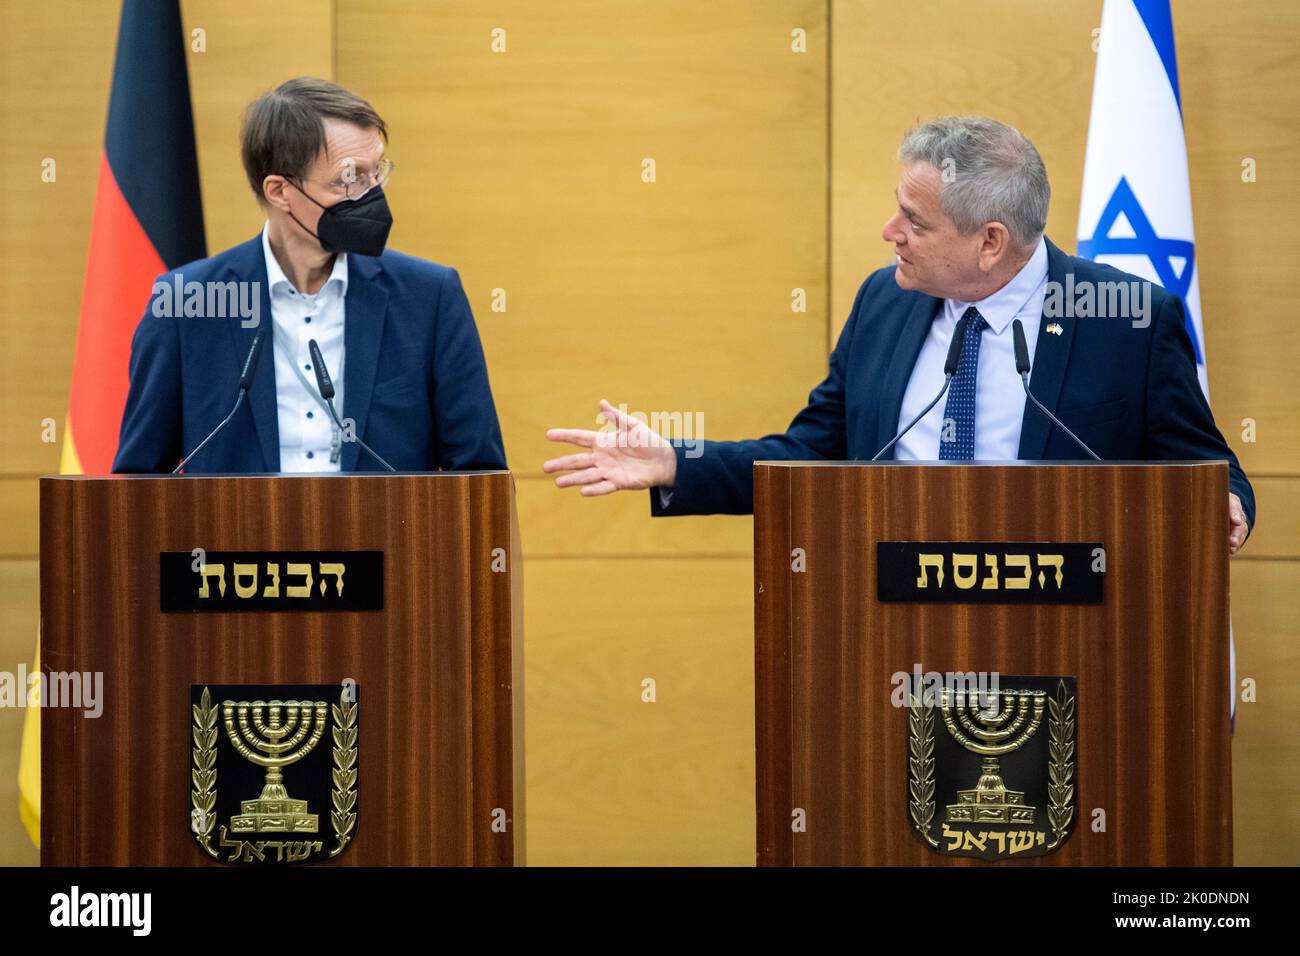 Jerusalem, Israel. 11th Sep, 2022. Karl Lauterbach (SPD, l), Federal Minister of Health, and Nitzan Horowitz, Chairman of the Meretz party and Israeli Minister of Health, stand at a press conference following a joint declaration of intent for cooperation on health policy issues. For the German minister, the focus in Israel will be on German-Israeli friendship, joint pandemic control and Israel as a role model for the digitization of healthcare. Credit: Christophe Gateau/dpa/Alamy Live News Stock Photo